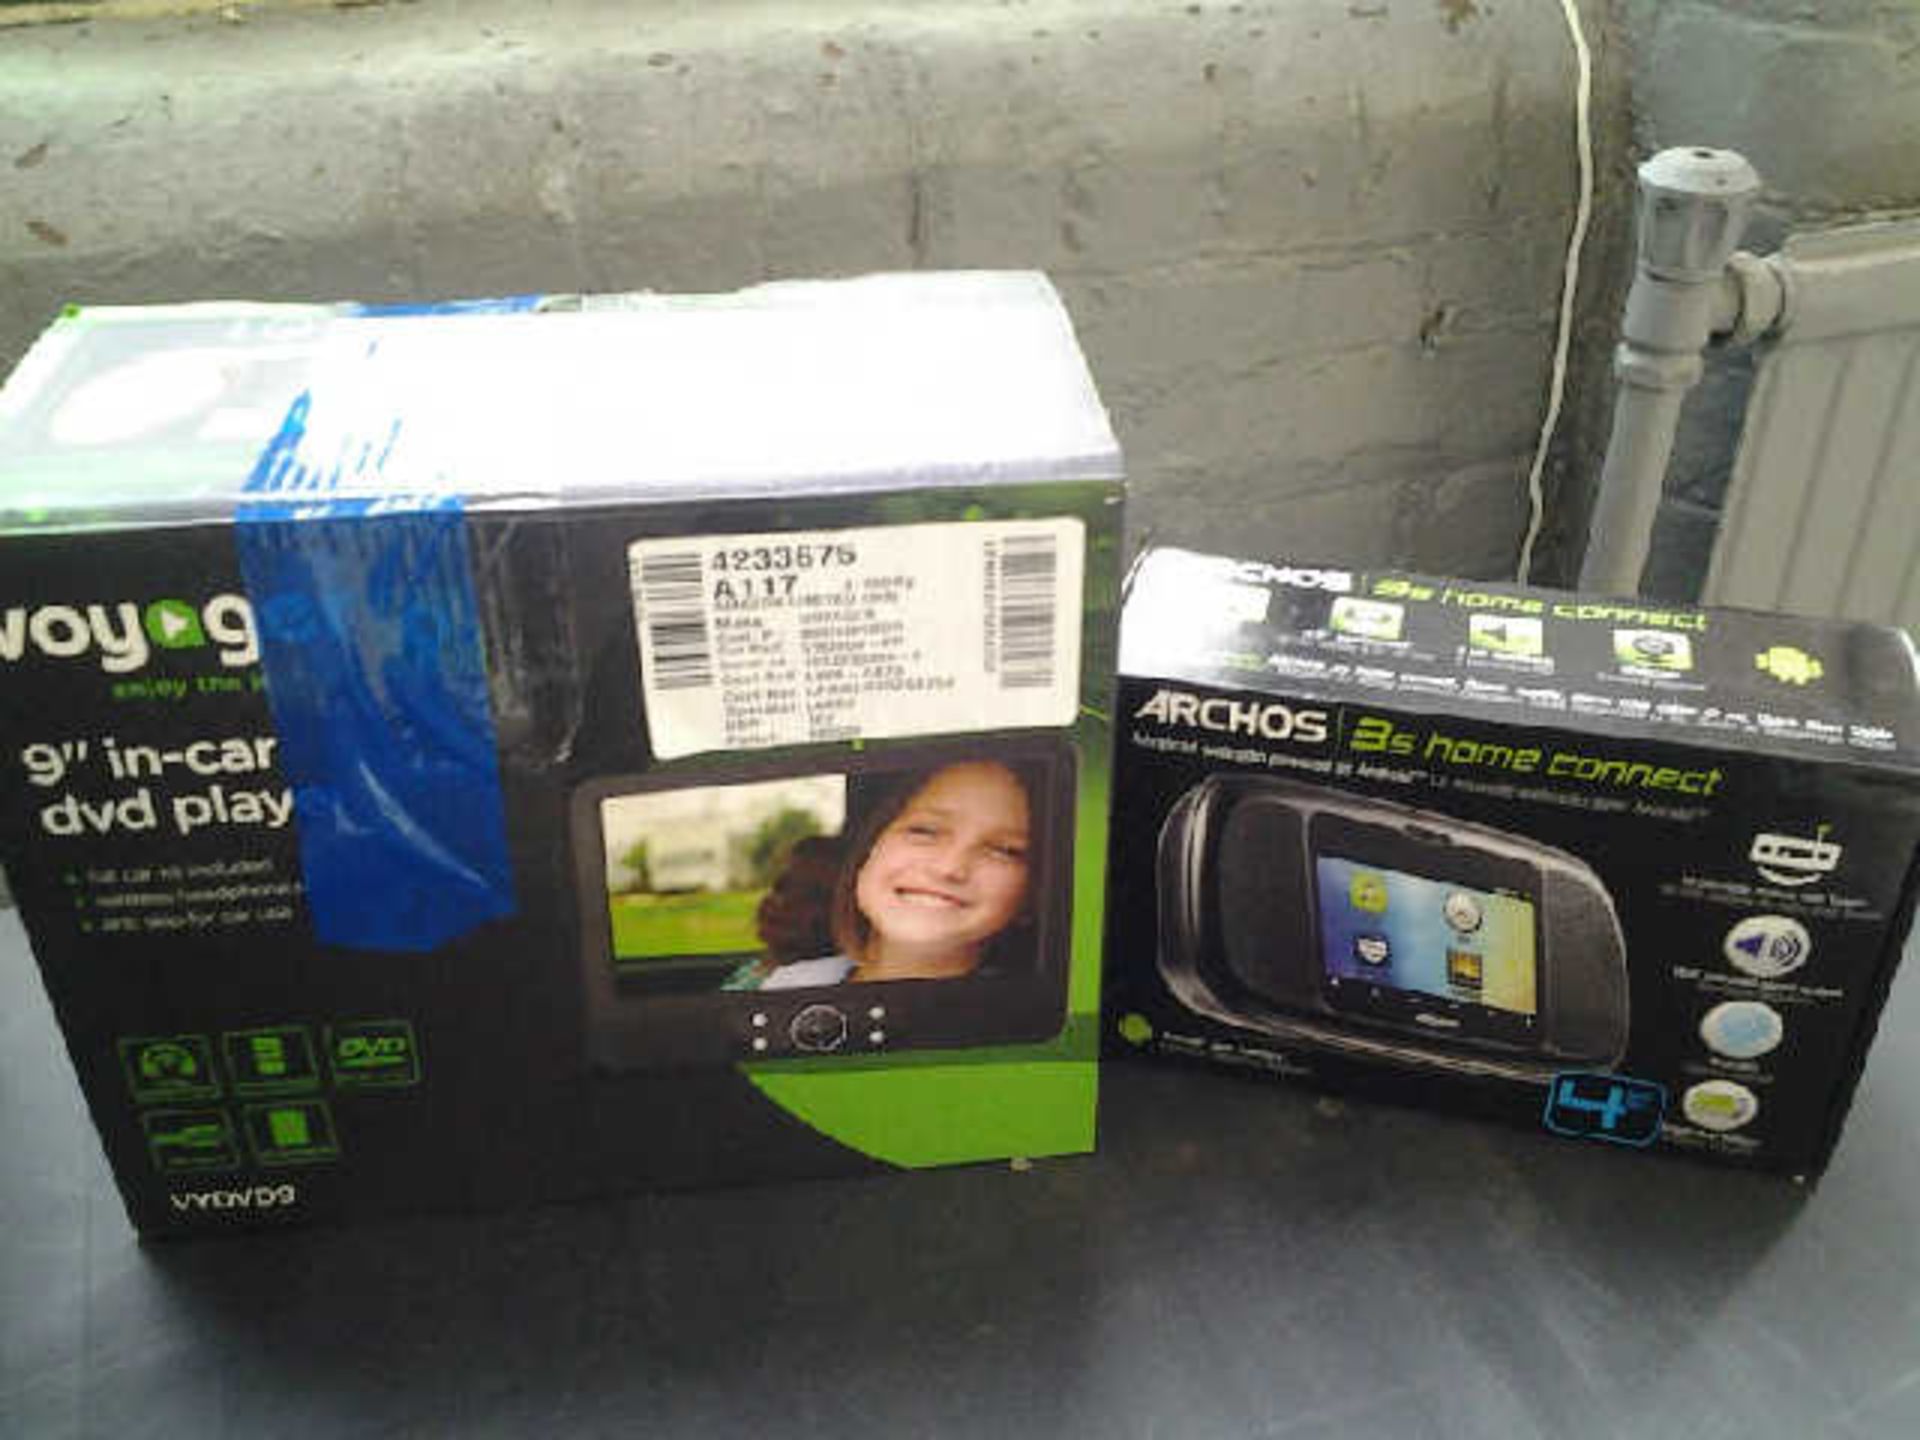 2 ITEMS INCLUDING VOYAGER 9 " IN CAR DVD PLAYER AND ARCHOS 3S HOME CONNECT ADVANCED WEB RADIO - Image 2 of 3